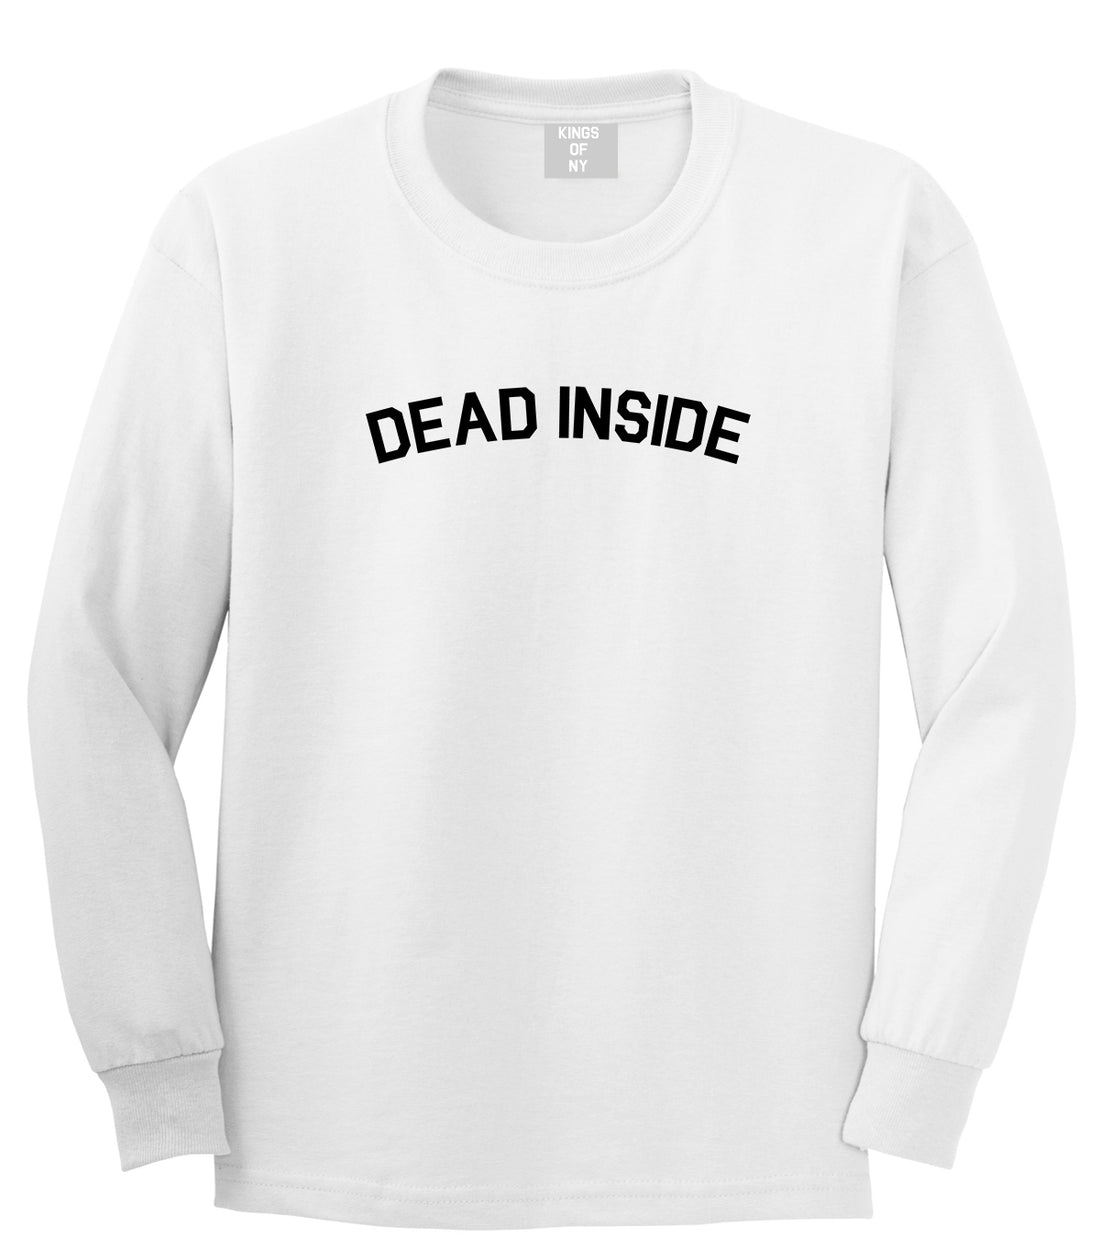 Dead Inside Arch Mens Long Sleeve T-Shirt White by Kings Of NY